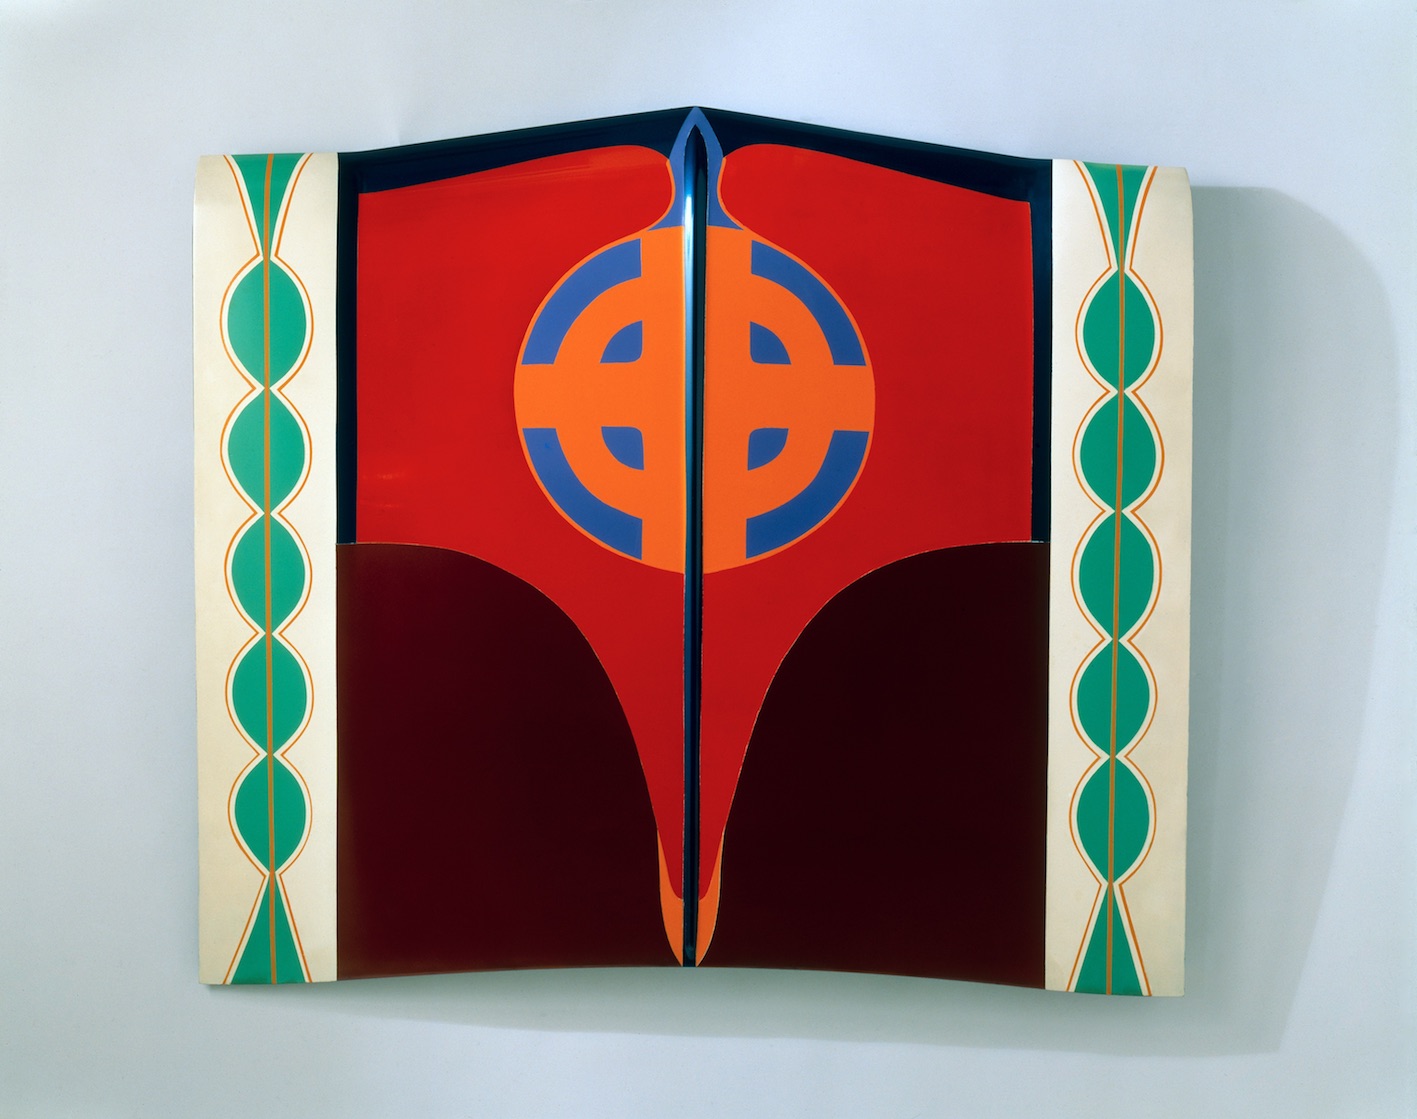 Judy Chicago, Car Hood, 1964; Sprayed automotive lacquer on car hood, 42 7/8 x 49 1/8 x 4 1/8 in.; Moderna Museet, Stockholm; Acquired 2007 with means from The Second Museum of our Wishes;© Judy Chicago/Artists Rights Society (ARS), New York .Photo Donald Woodman/ARS NY